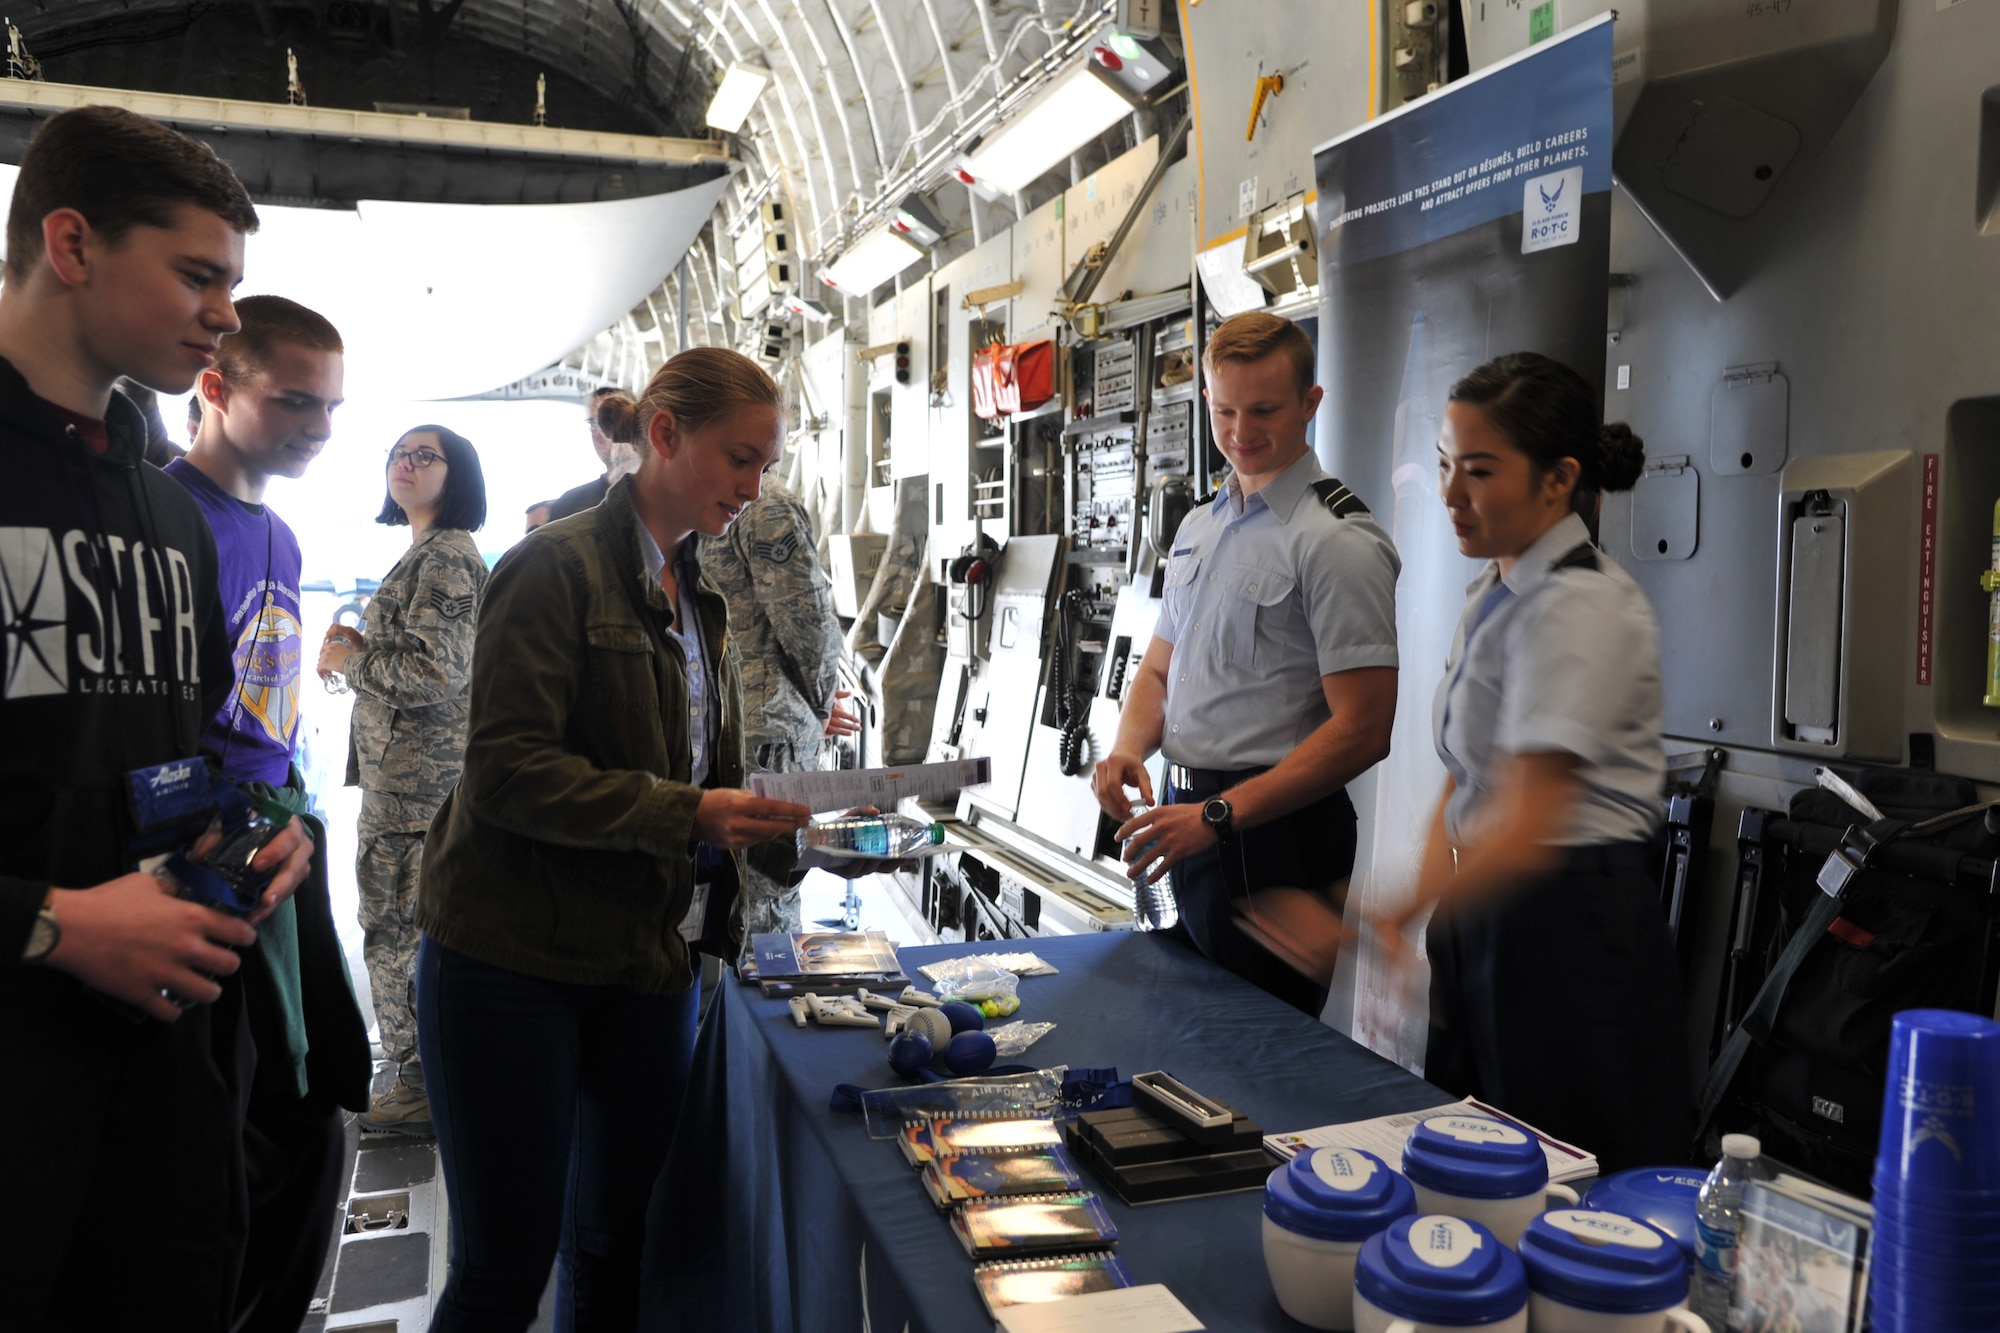 Cadets from the Air Force Reserve Officer Training Corps Detachment 910 share information with teenage students visiting the C-17 Globemaster III static display during the Alaska Airlines Aviation Day event May 5, 2018 at Seattle-Tacoma International Airport.